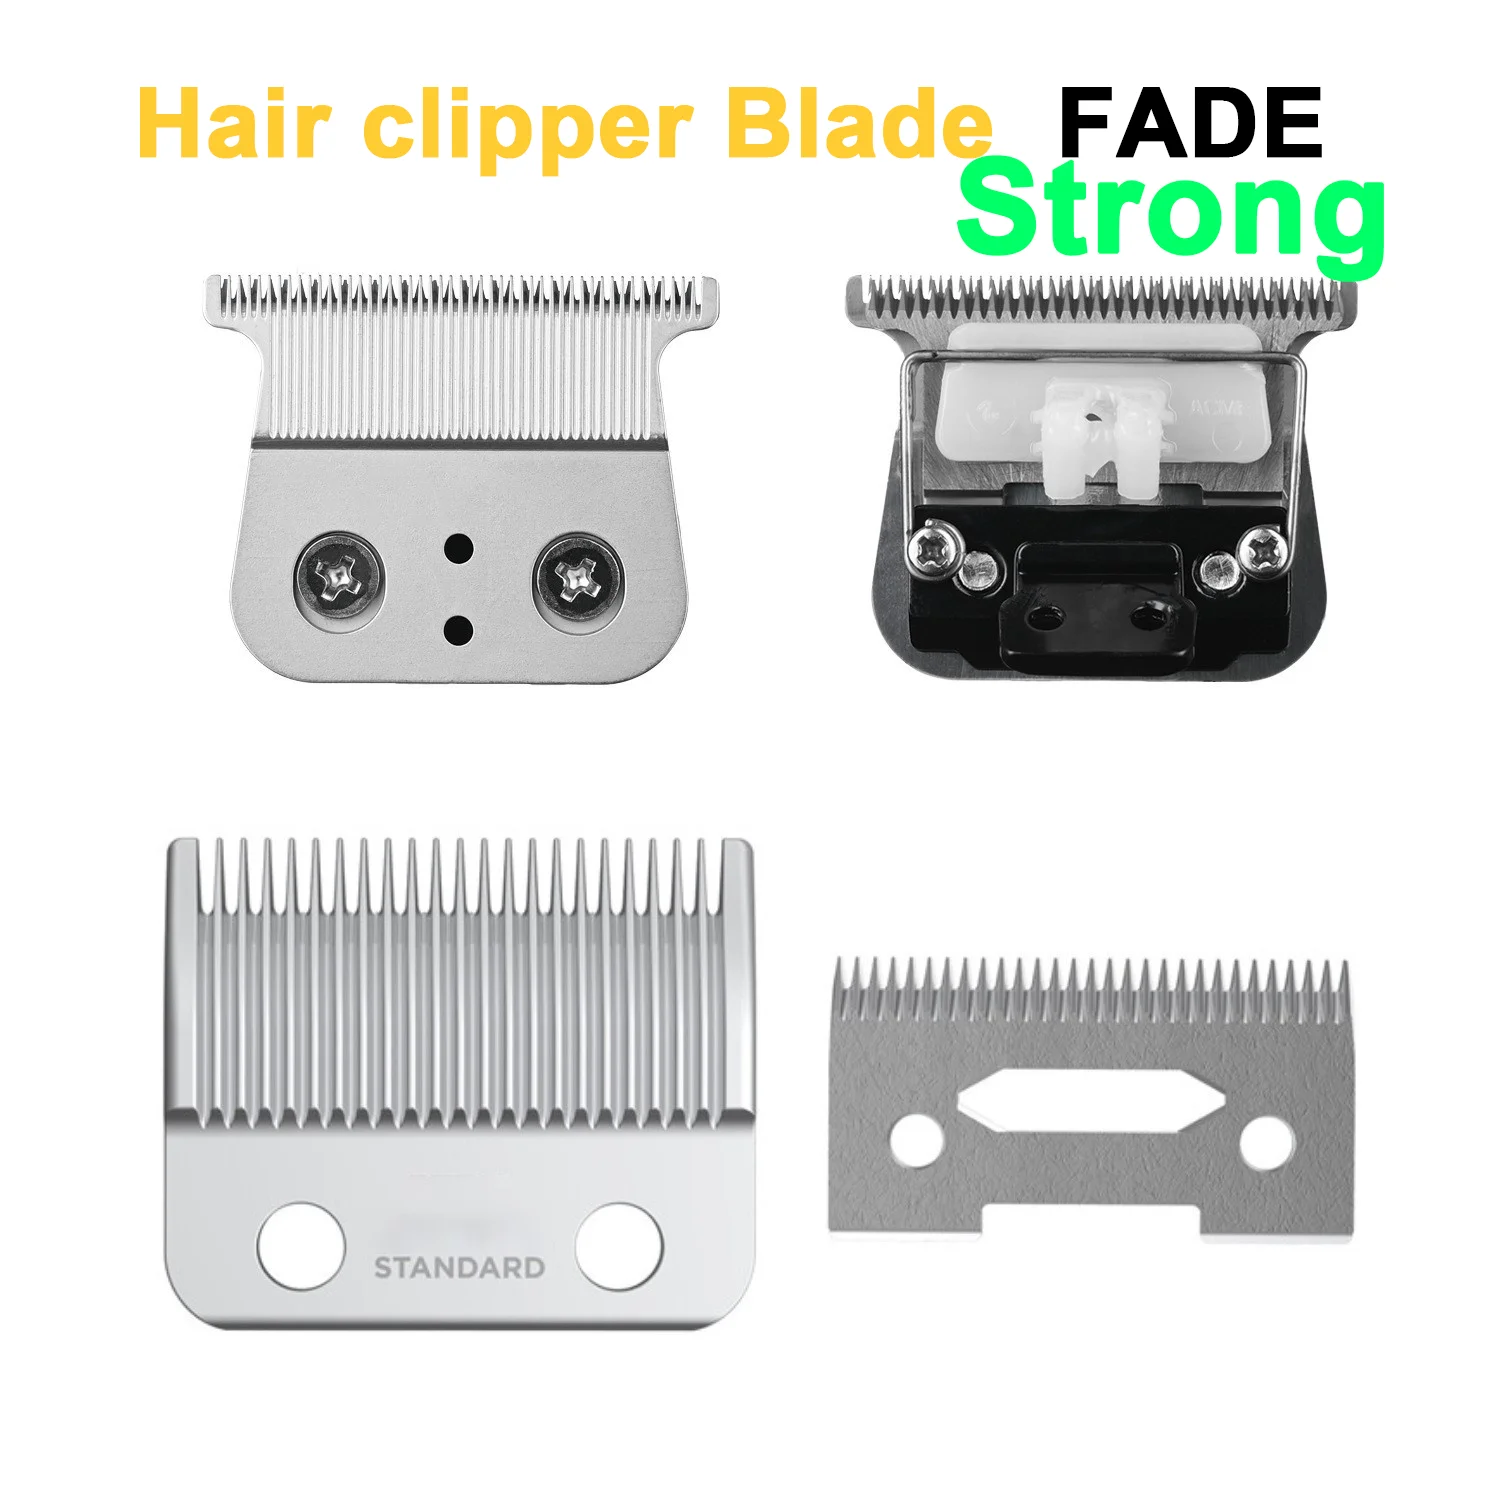 for andis d8 electric push shear motherboard hair clipper circuit pcb board 1pcs 2020C Original American Electric Push Shear FADE Blade 2020T Series Knife Head Oil Head Hair Clipper Accessories Base Charger